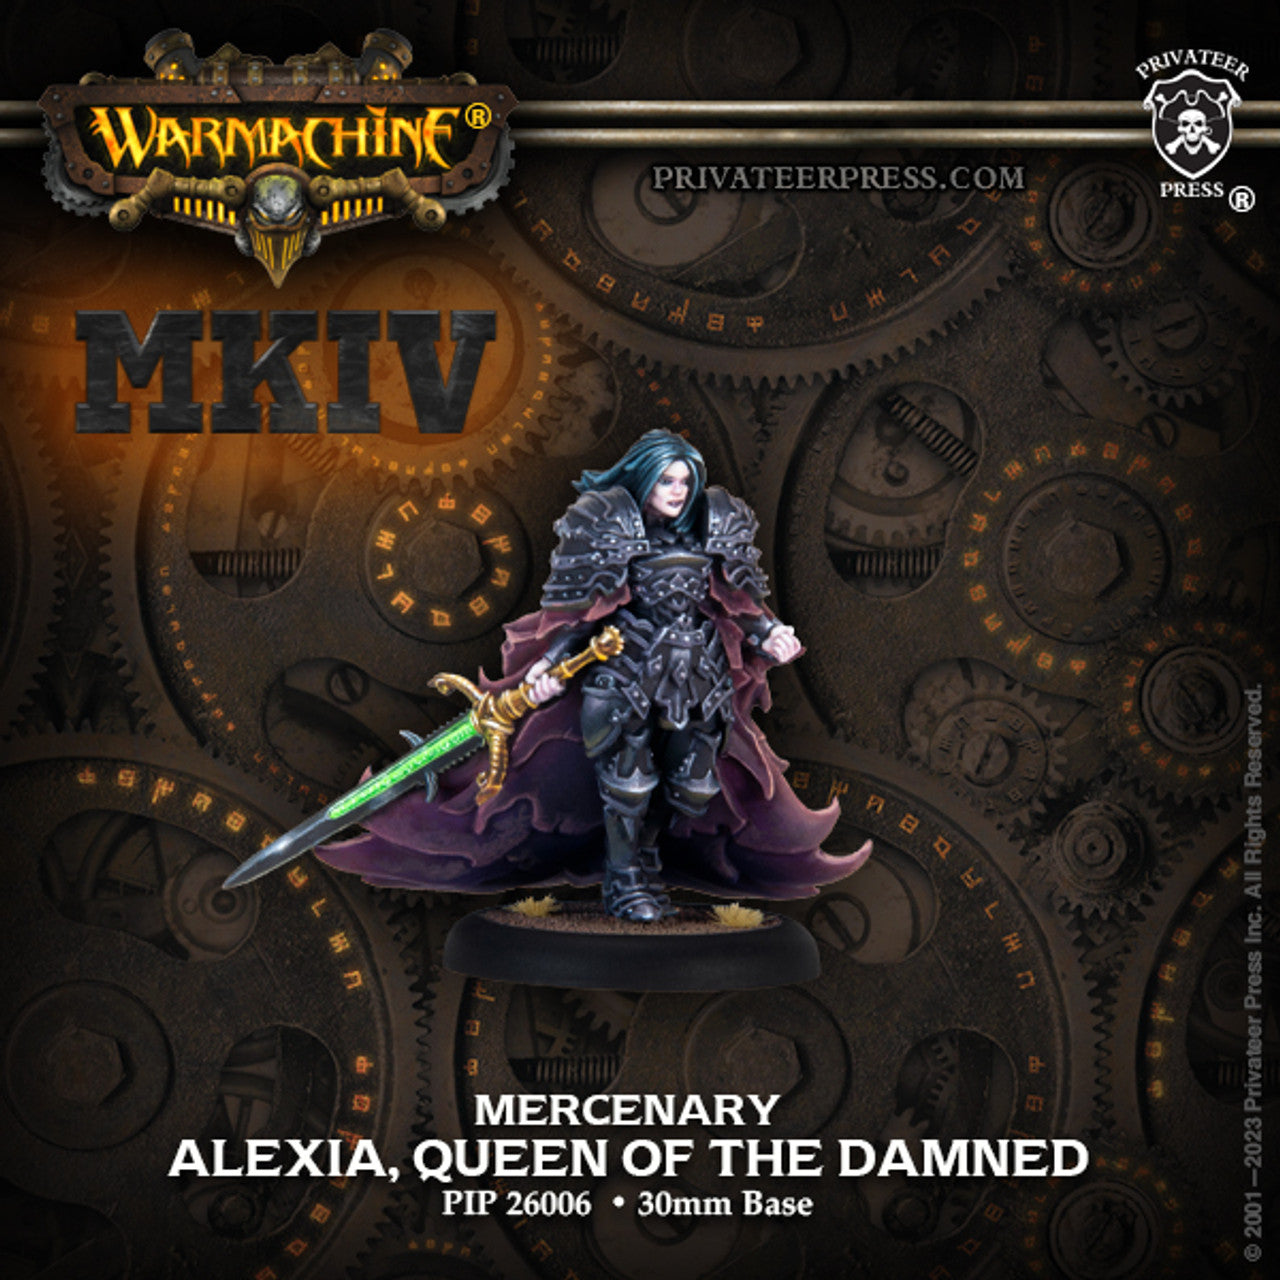 Mercenary: Alexia, Queen of the Damned